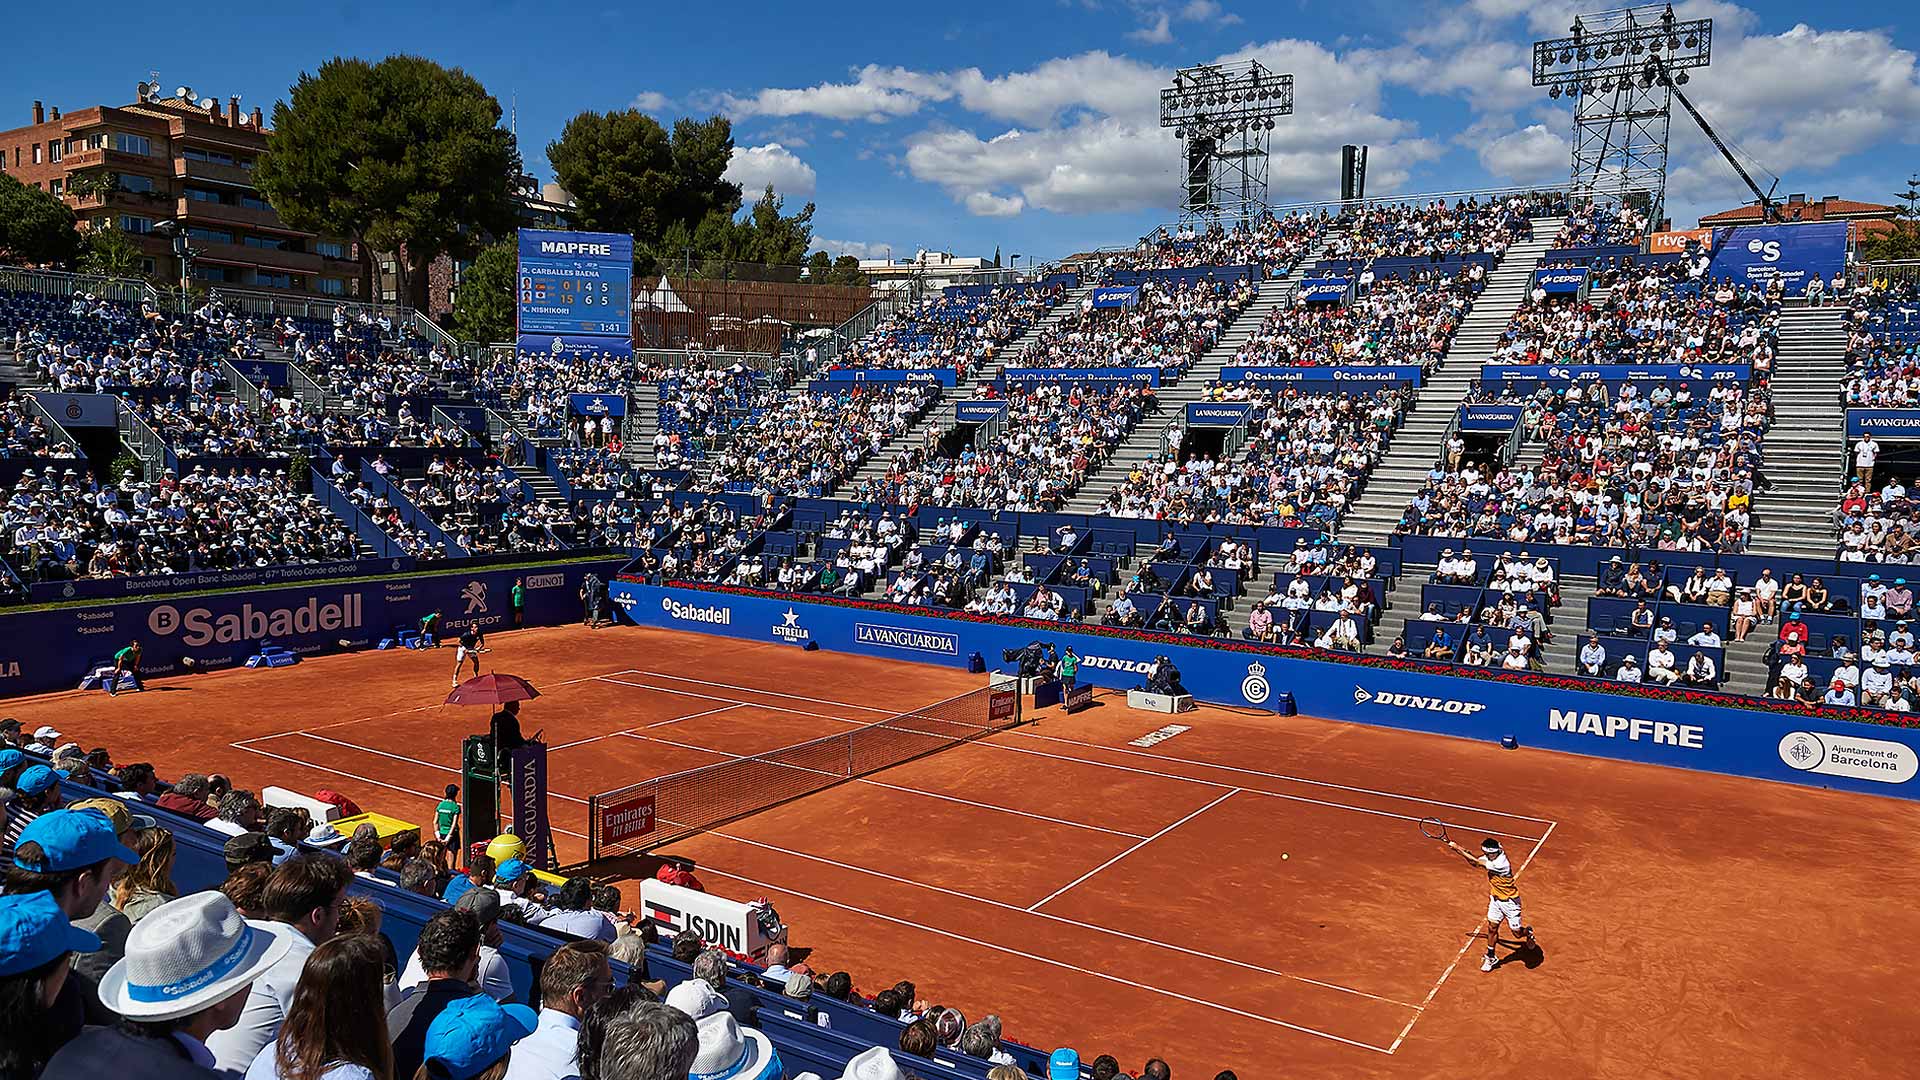 Atp Barcellona 2021 Tennis Atp Barcelona 2021 Norrie Opens Clay Court